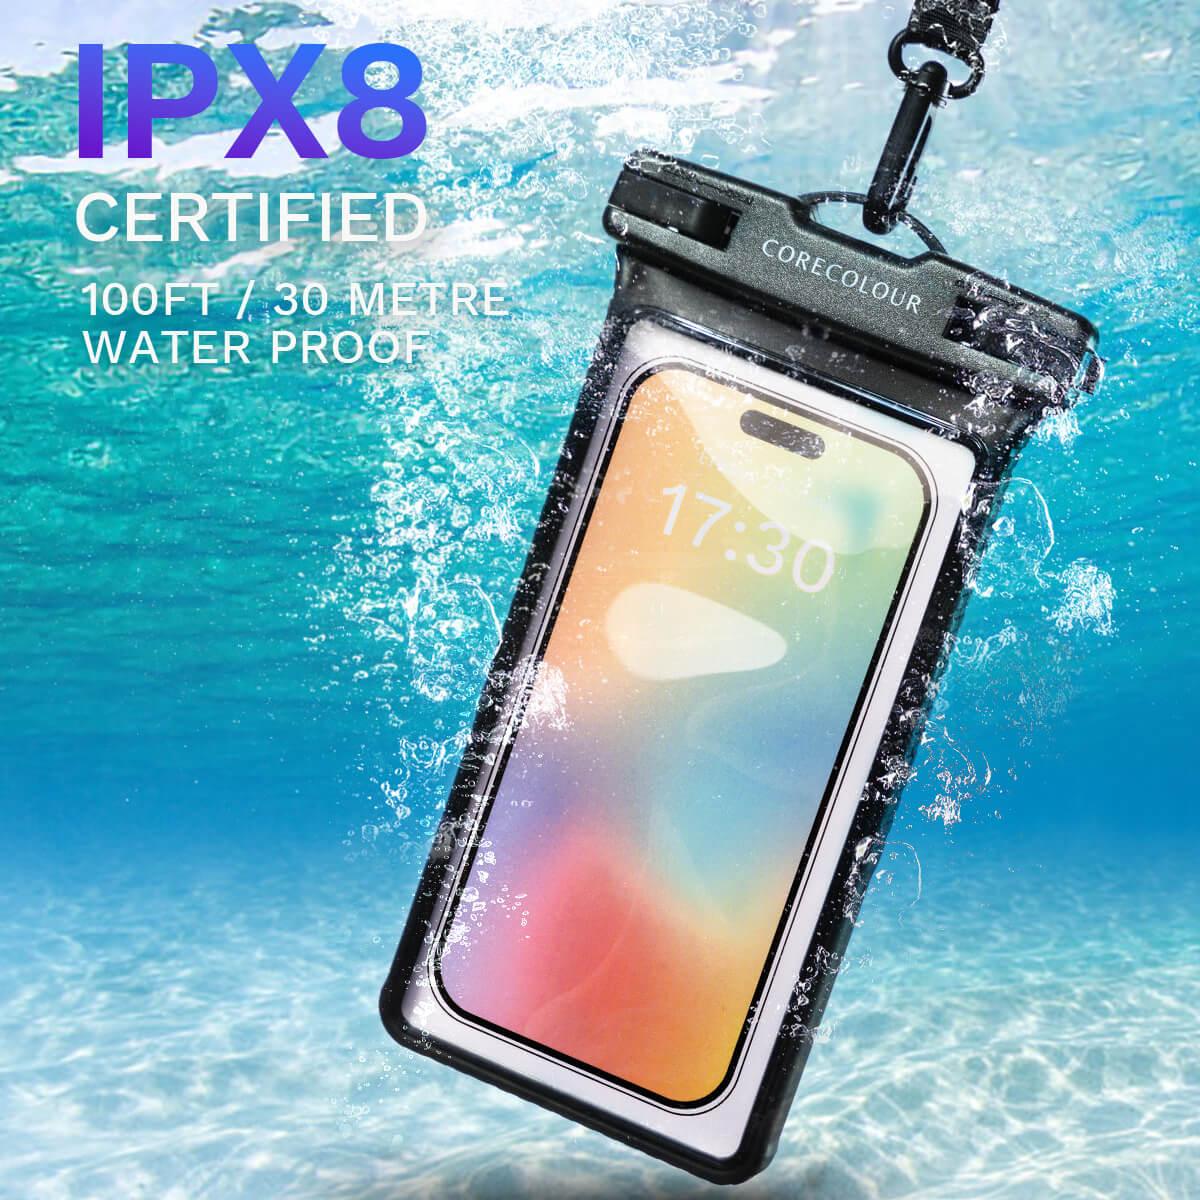 Orange IPX8 Certified Water Proof Bag with Lanyard - CORECOLOUR